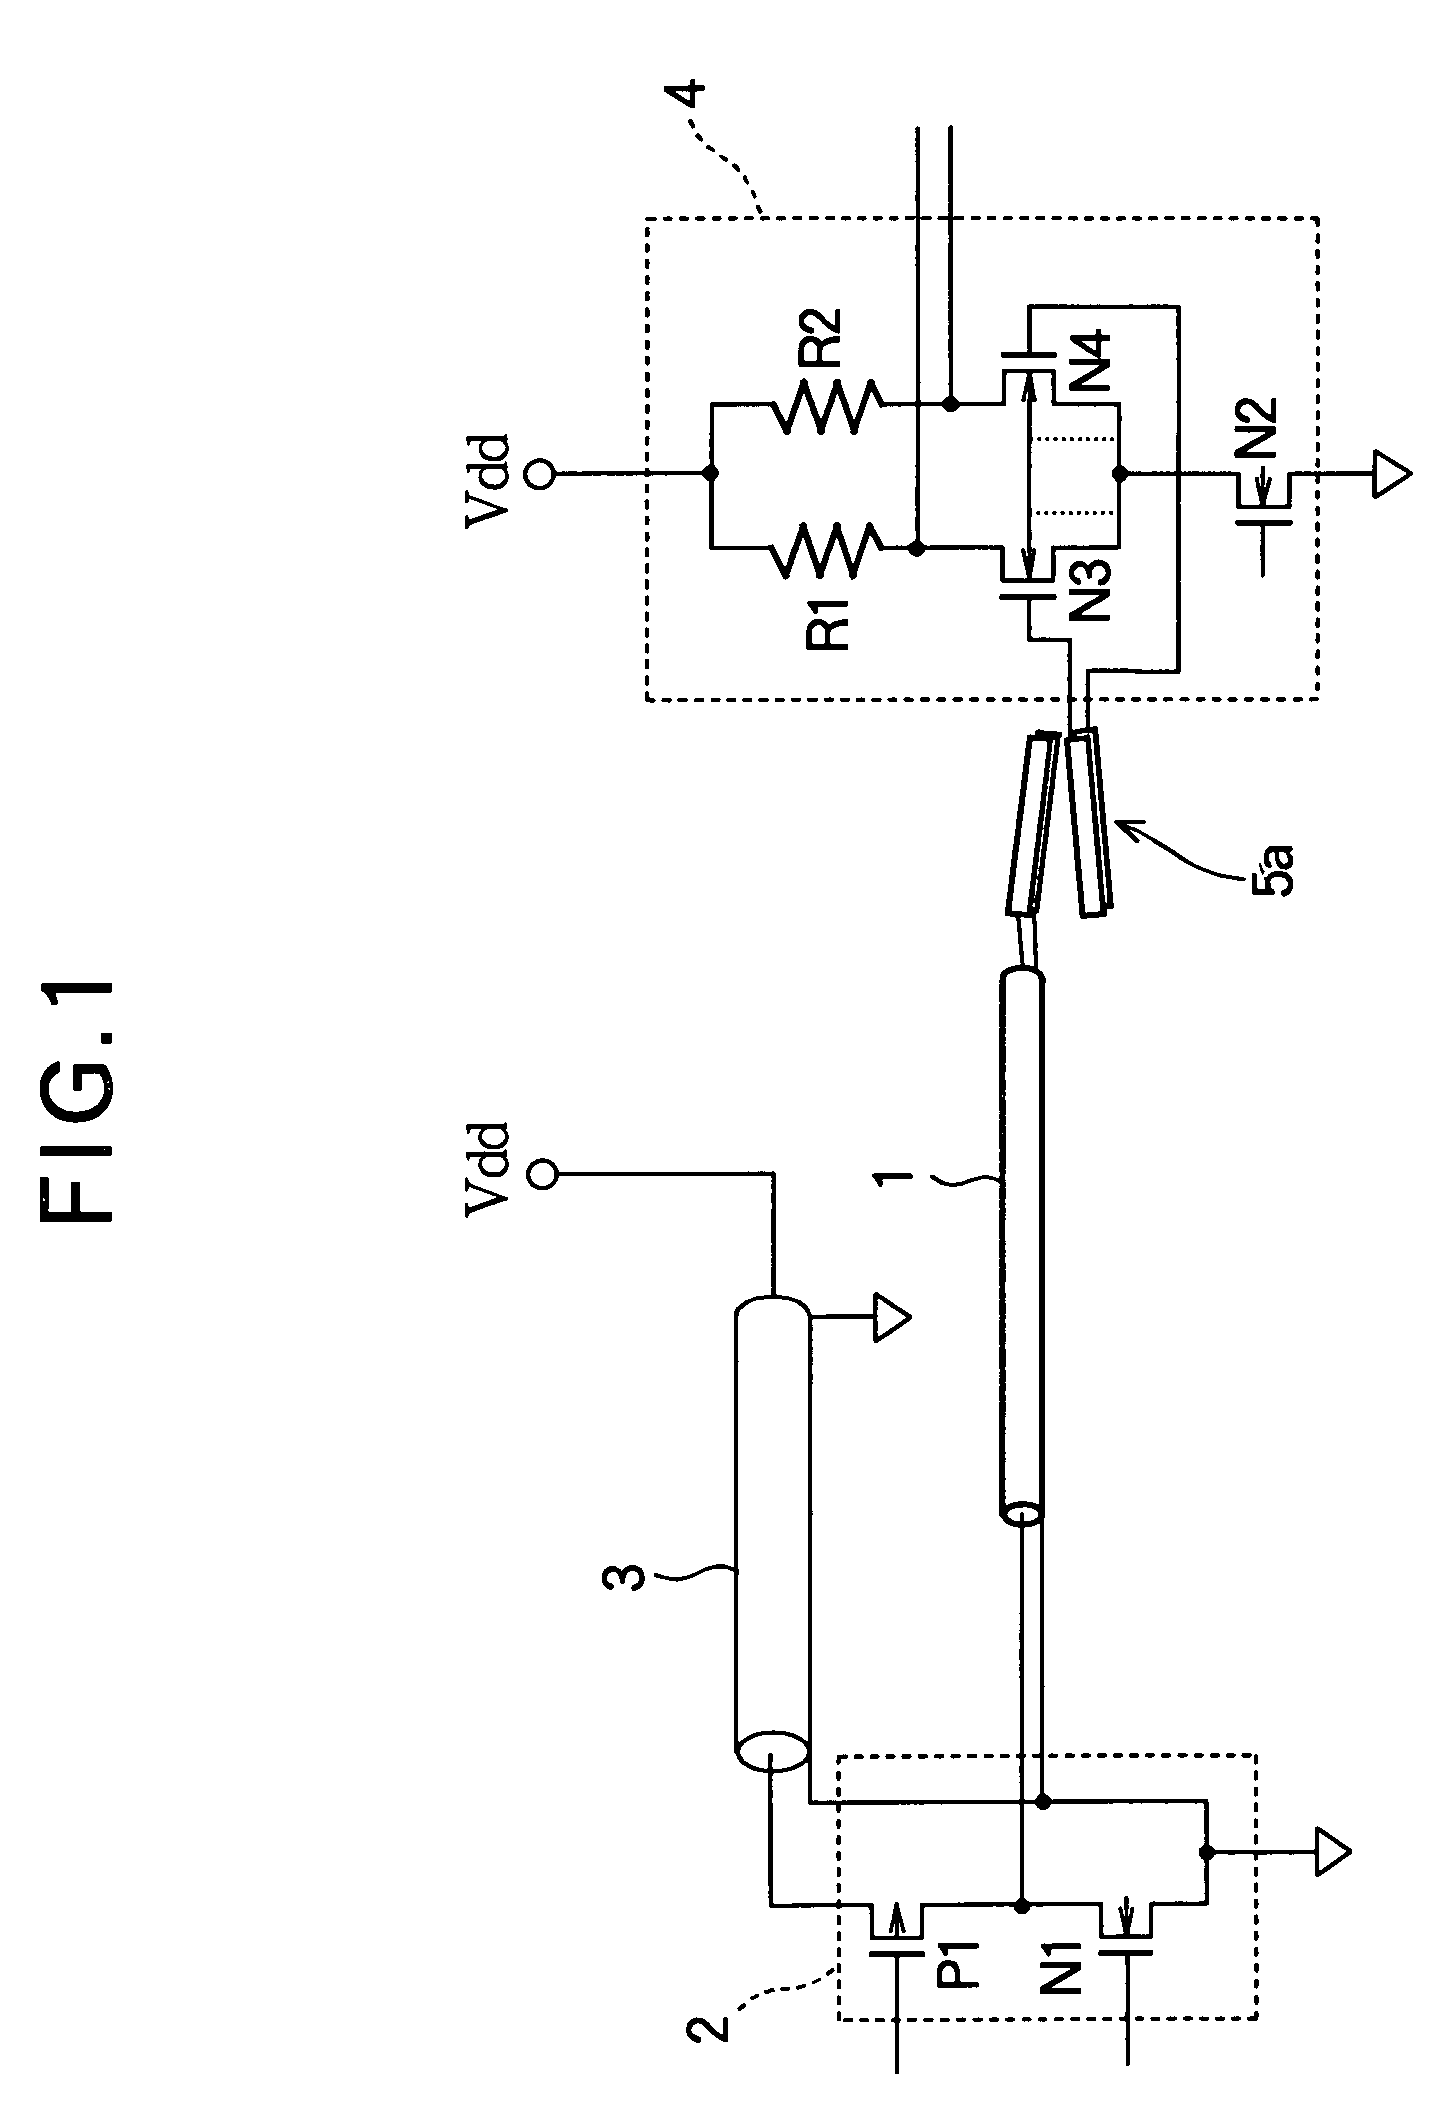 Signal transmission apparatus and interconnection structure